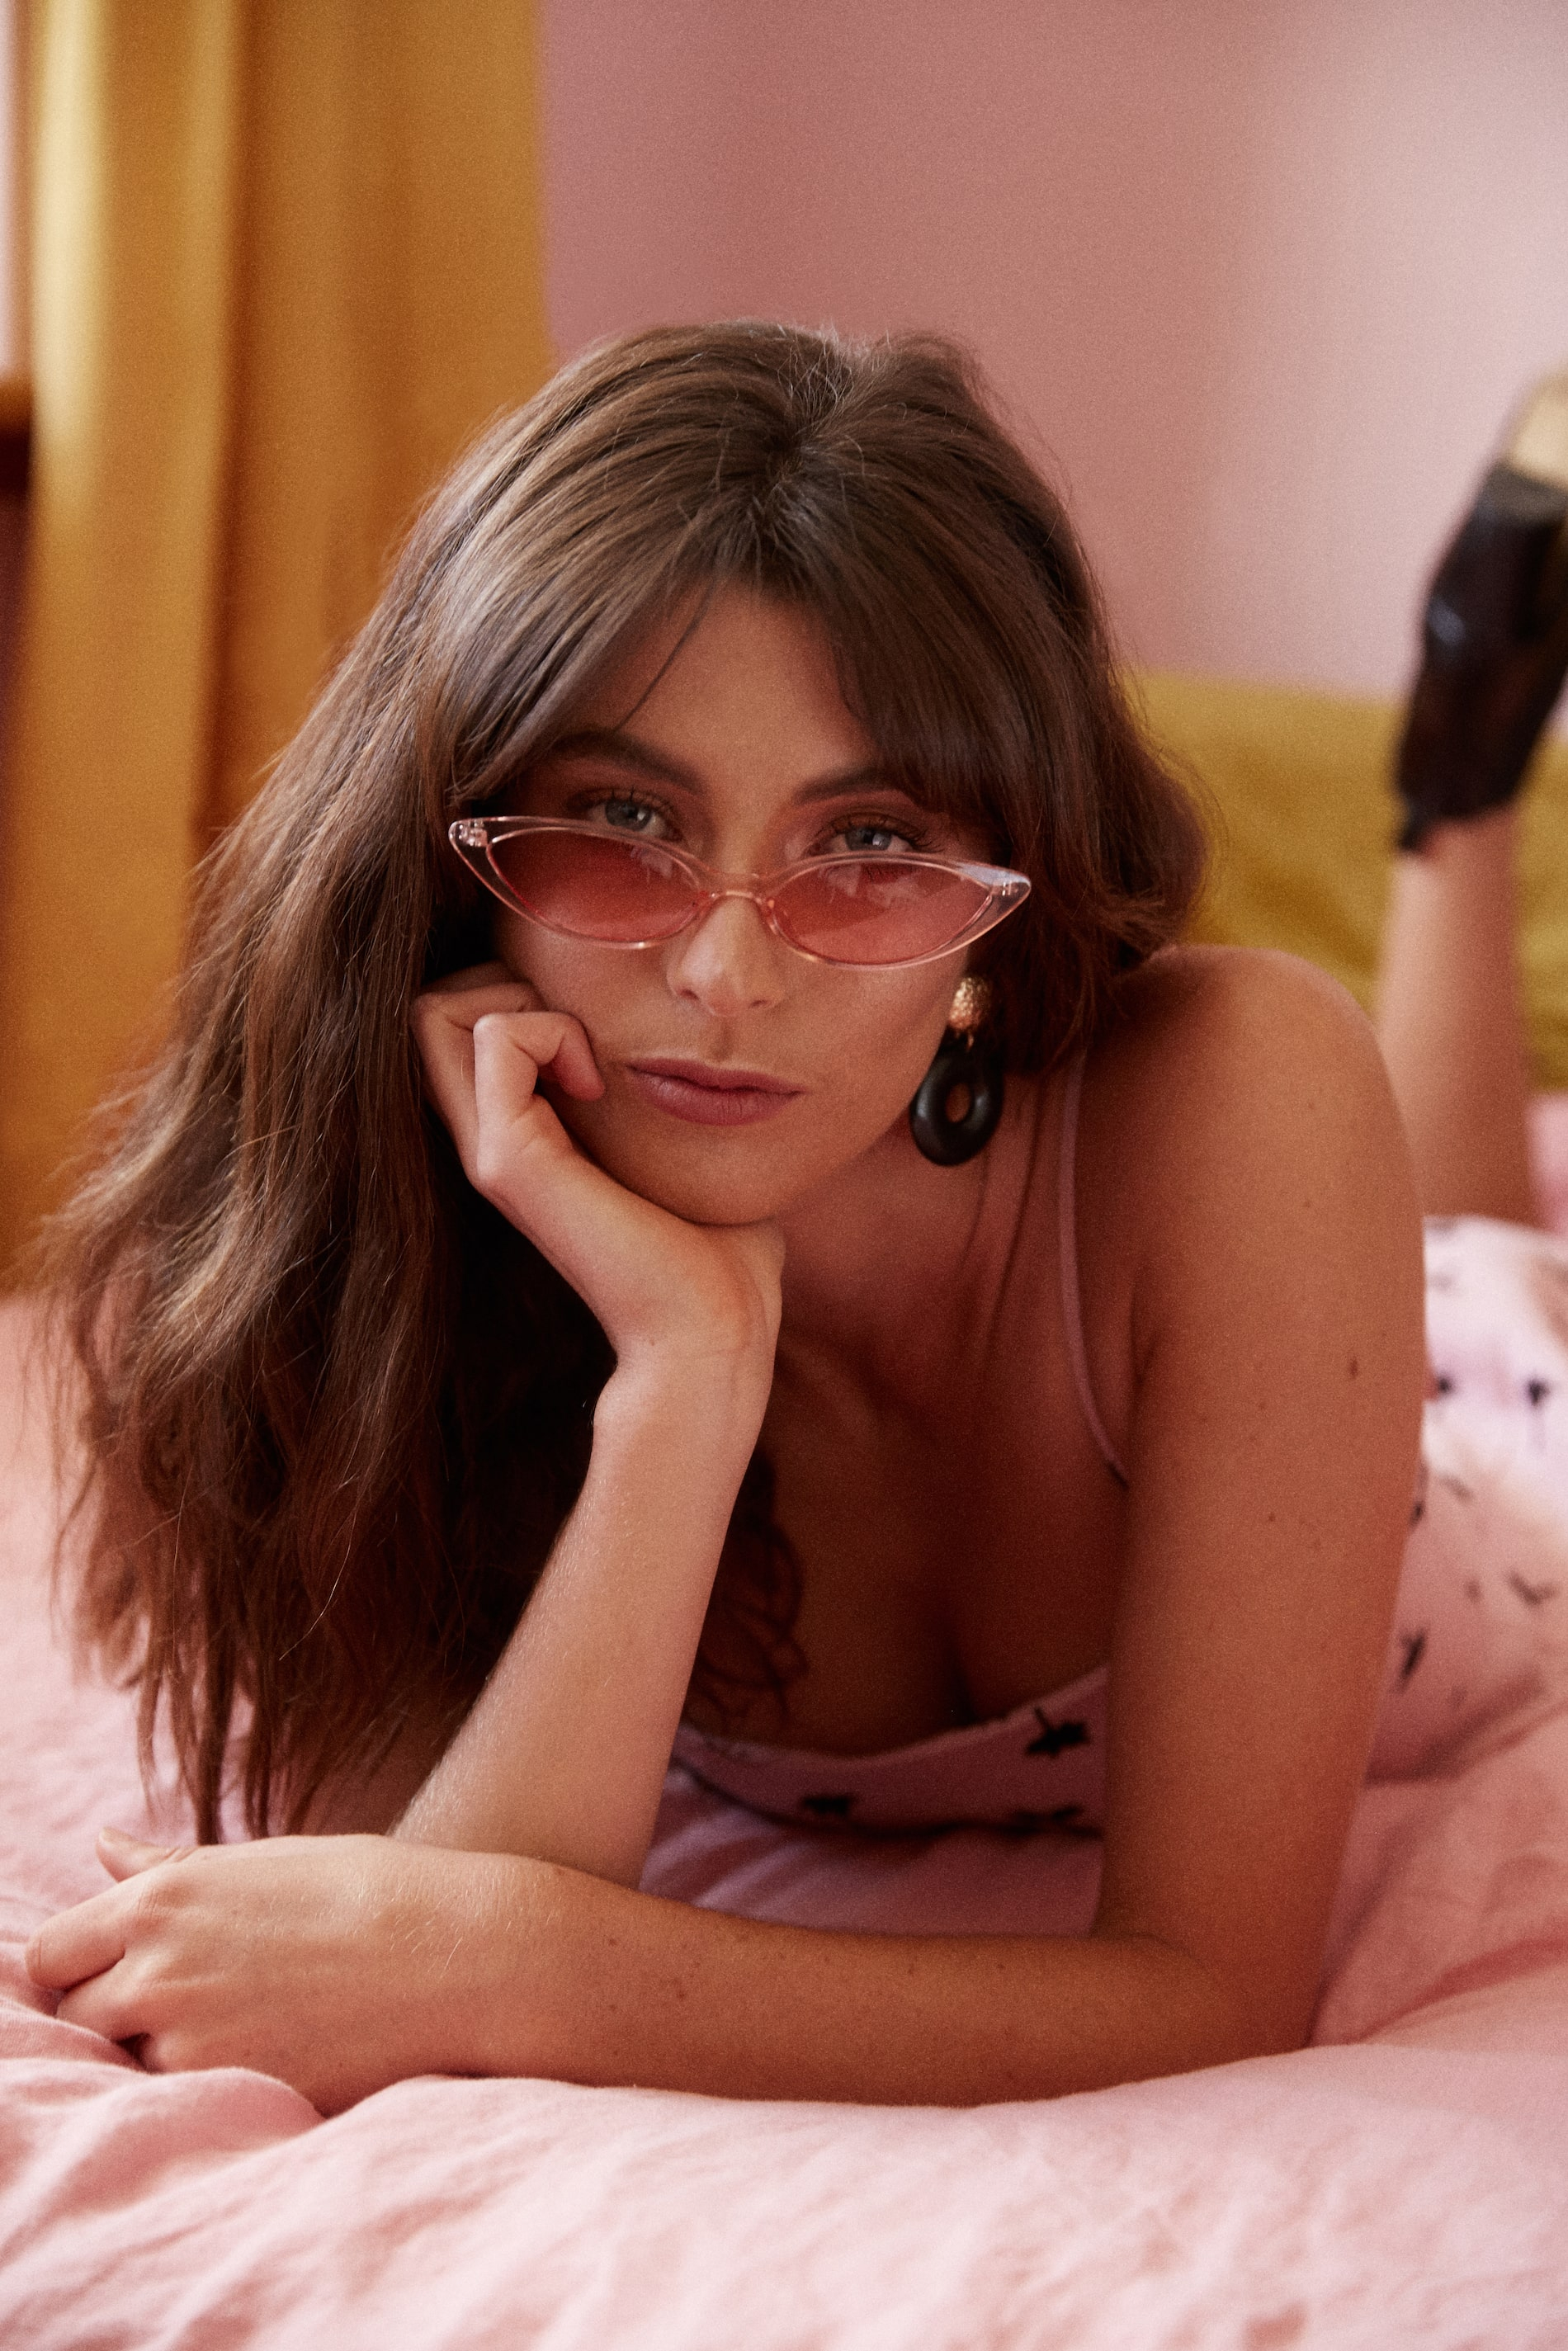 Model wearing tinted pink sunglasses